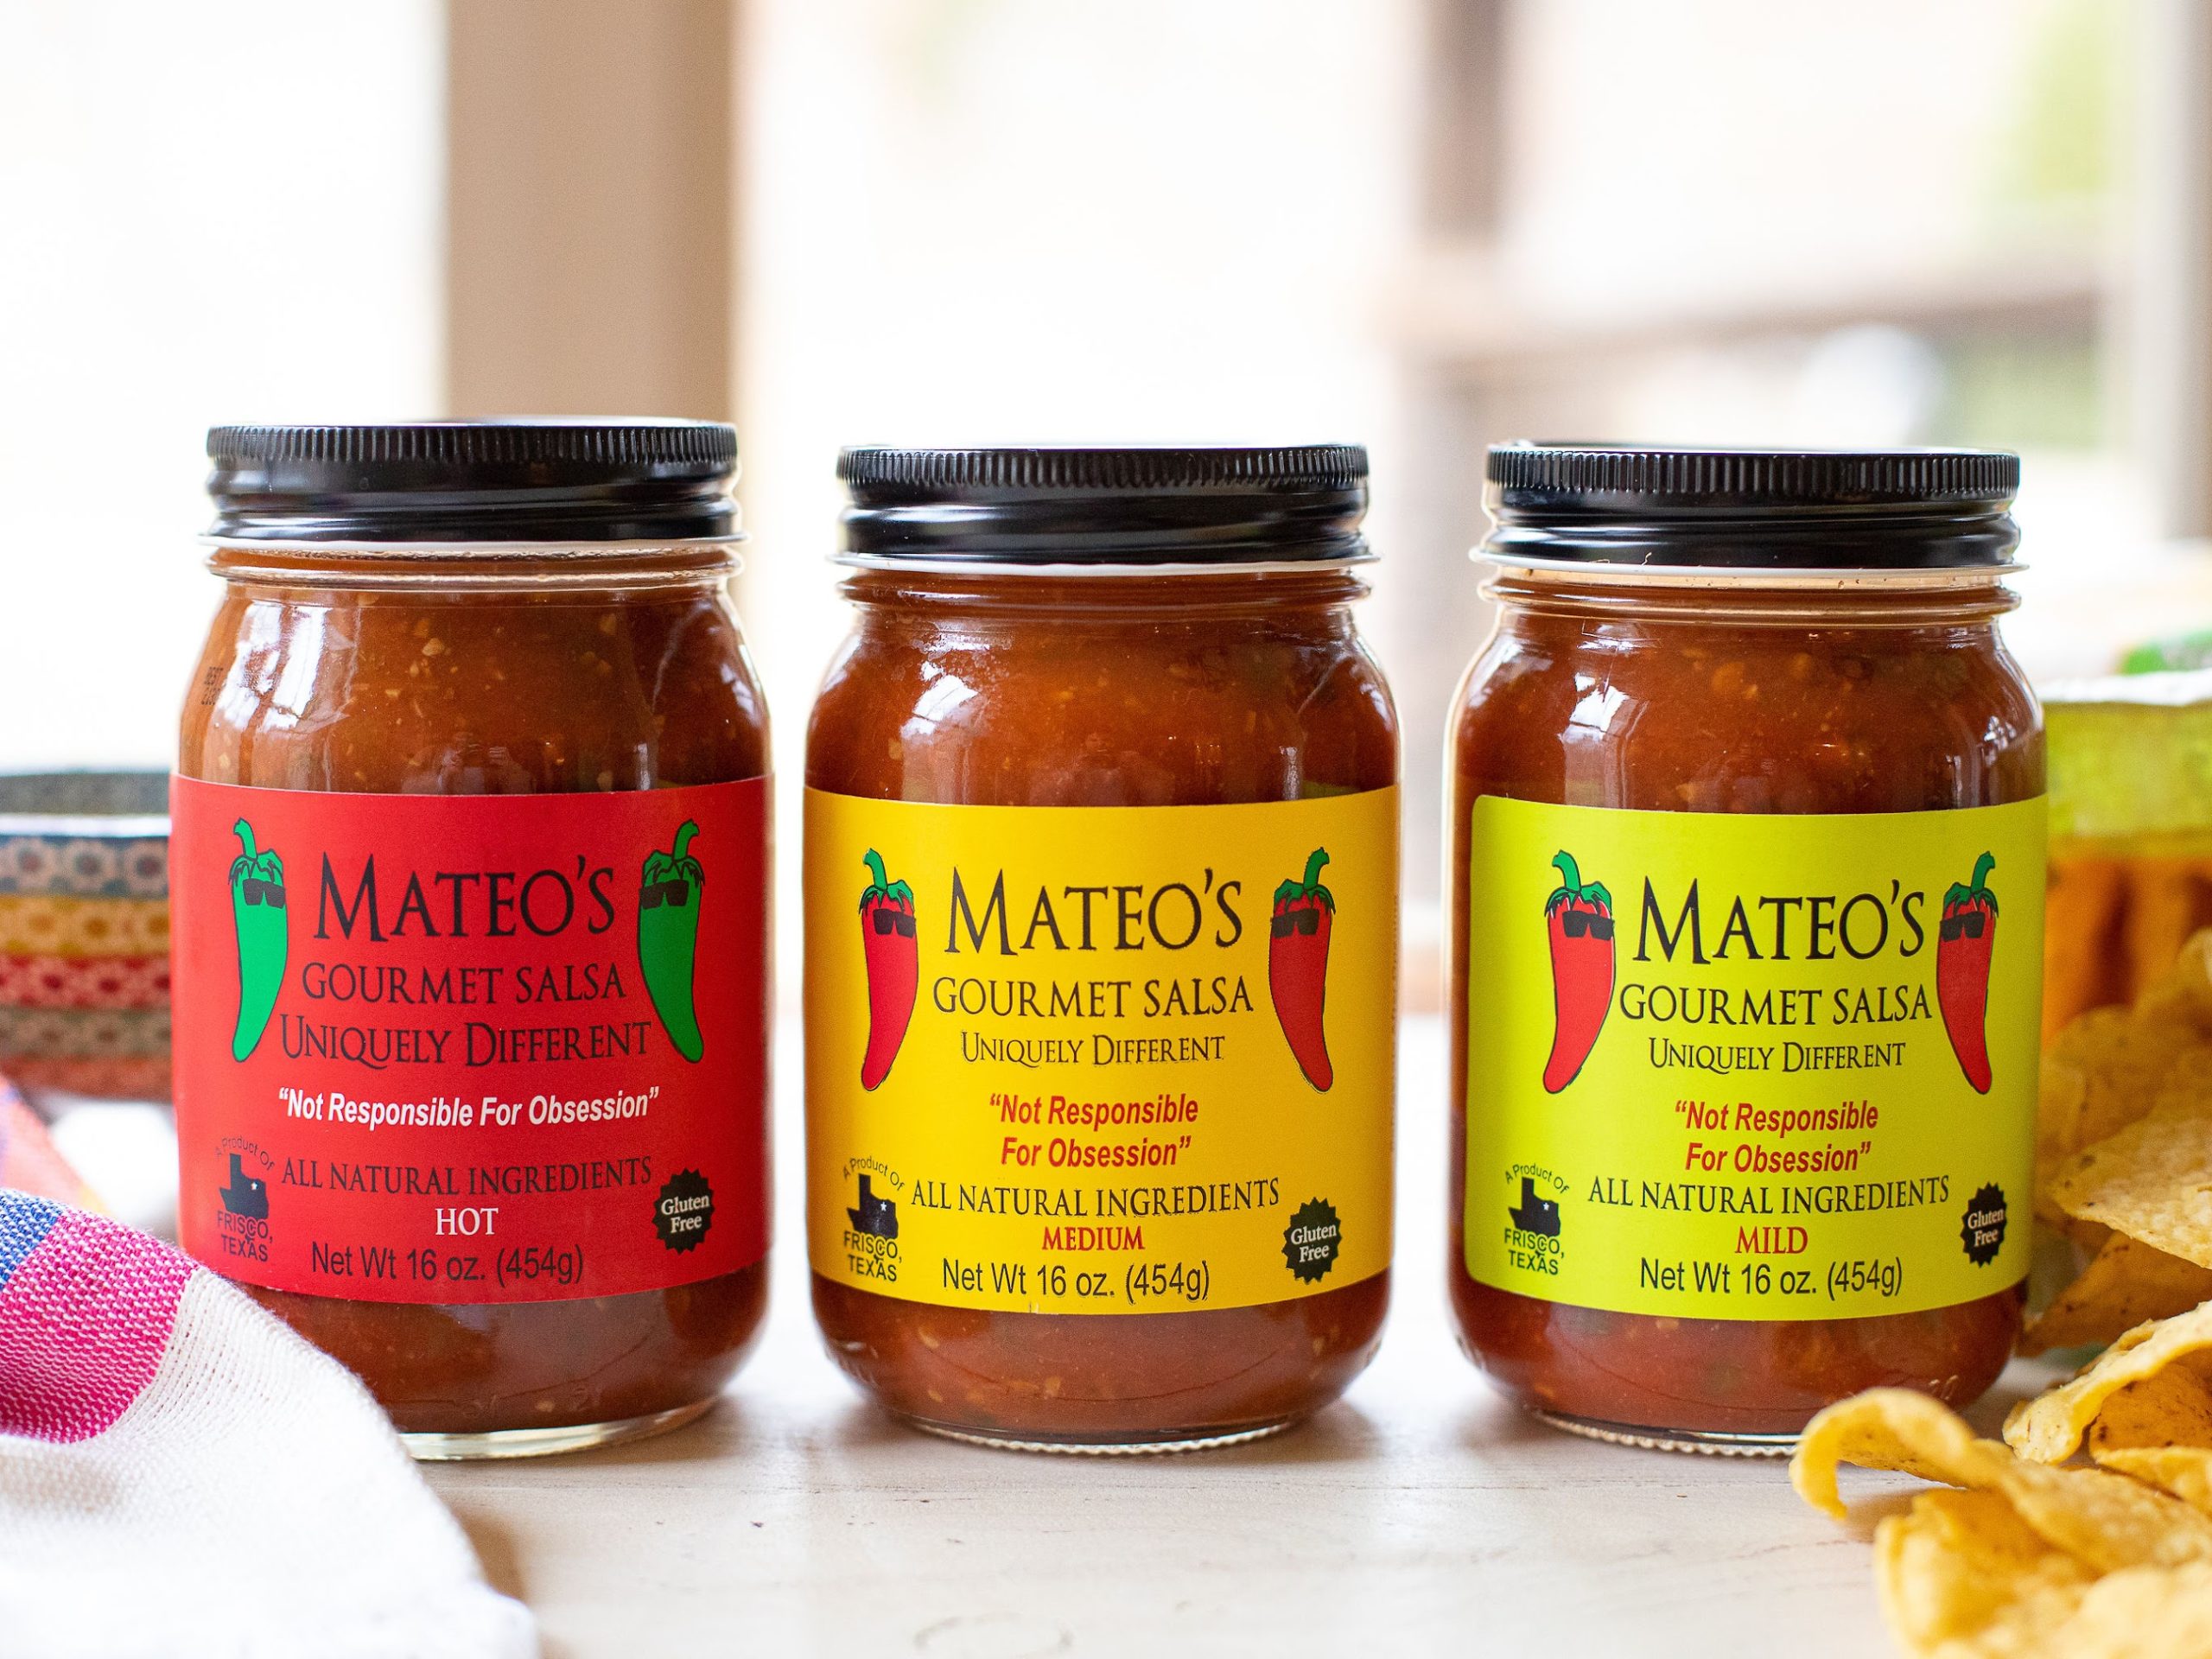 Mateo's Gourmet Salsa Available At Publix - Grab The Jars On Sale Right Now on I Heart Publix